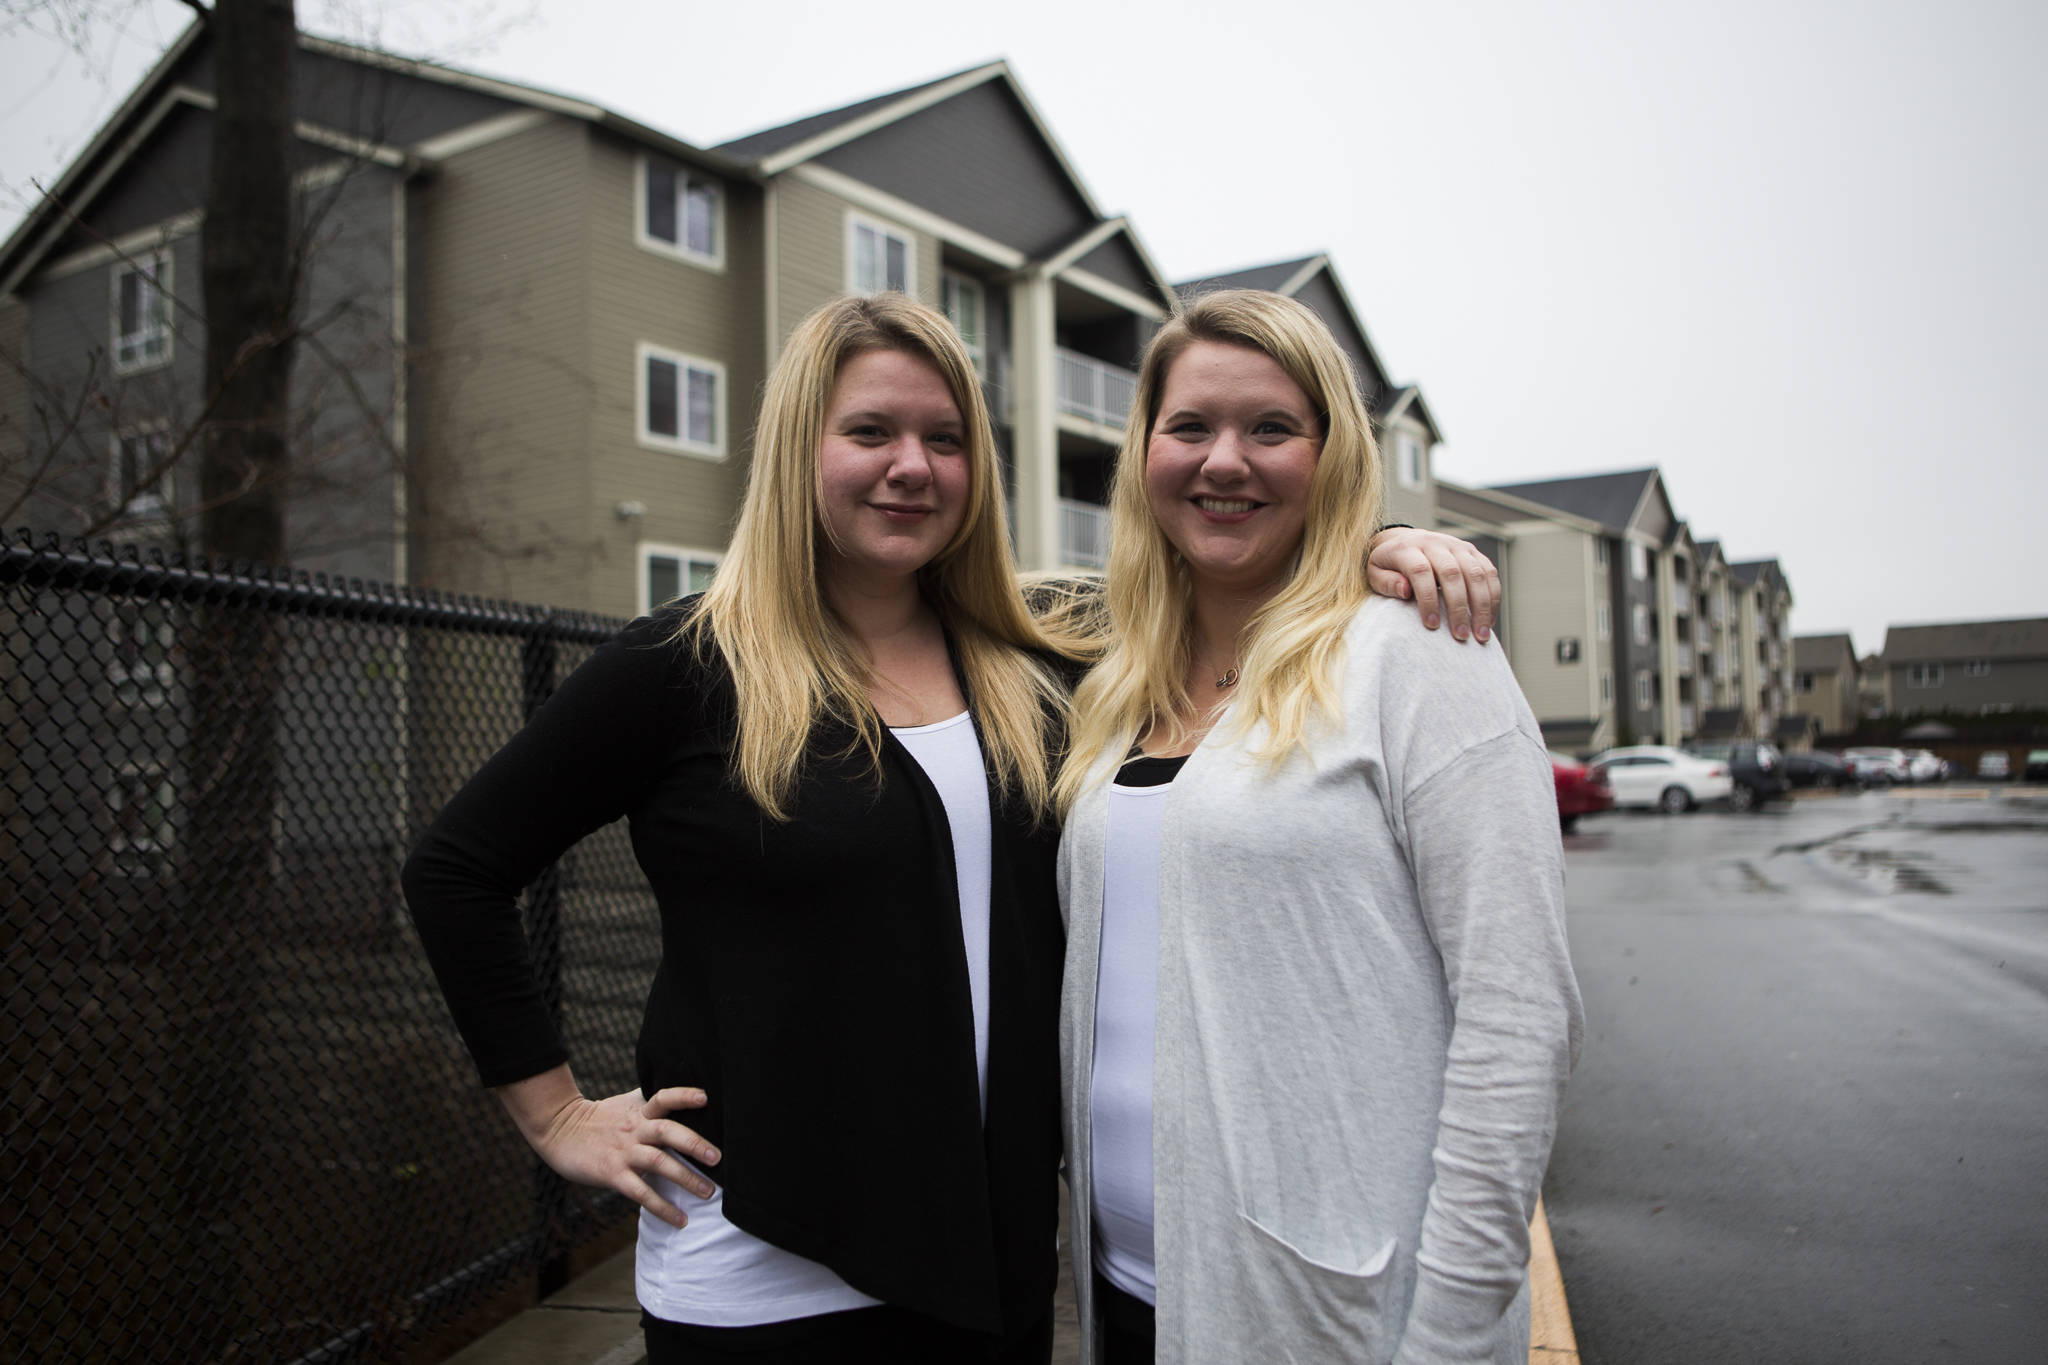 Britt Morgan (left) manages the Scriber Creek Apartments. Her twin sister, Rachel Morgan, manages the Madison Way Apartments. (Olivia Vanni / The Herald)